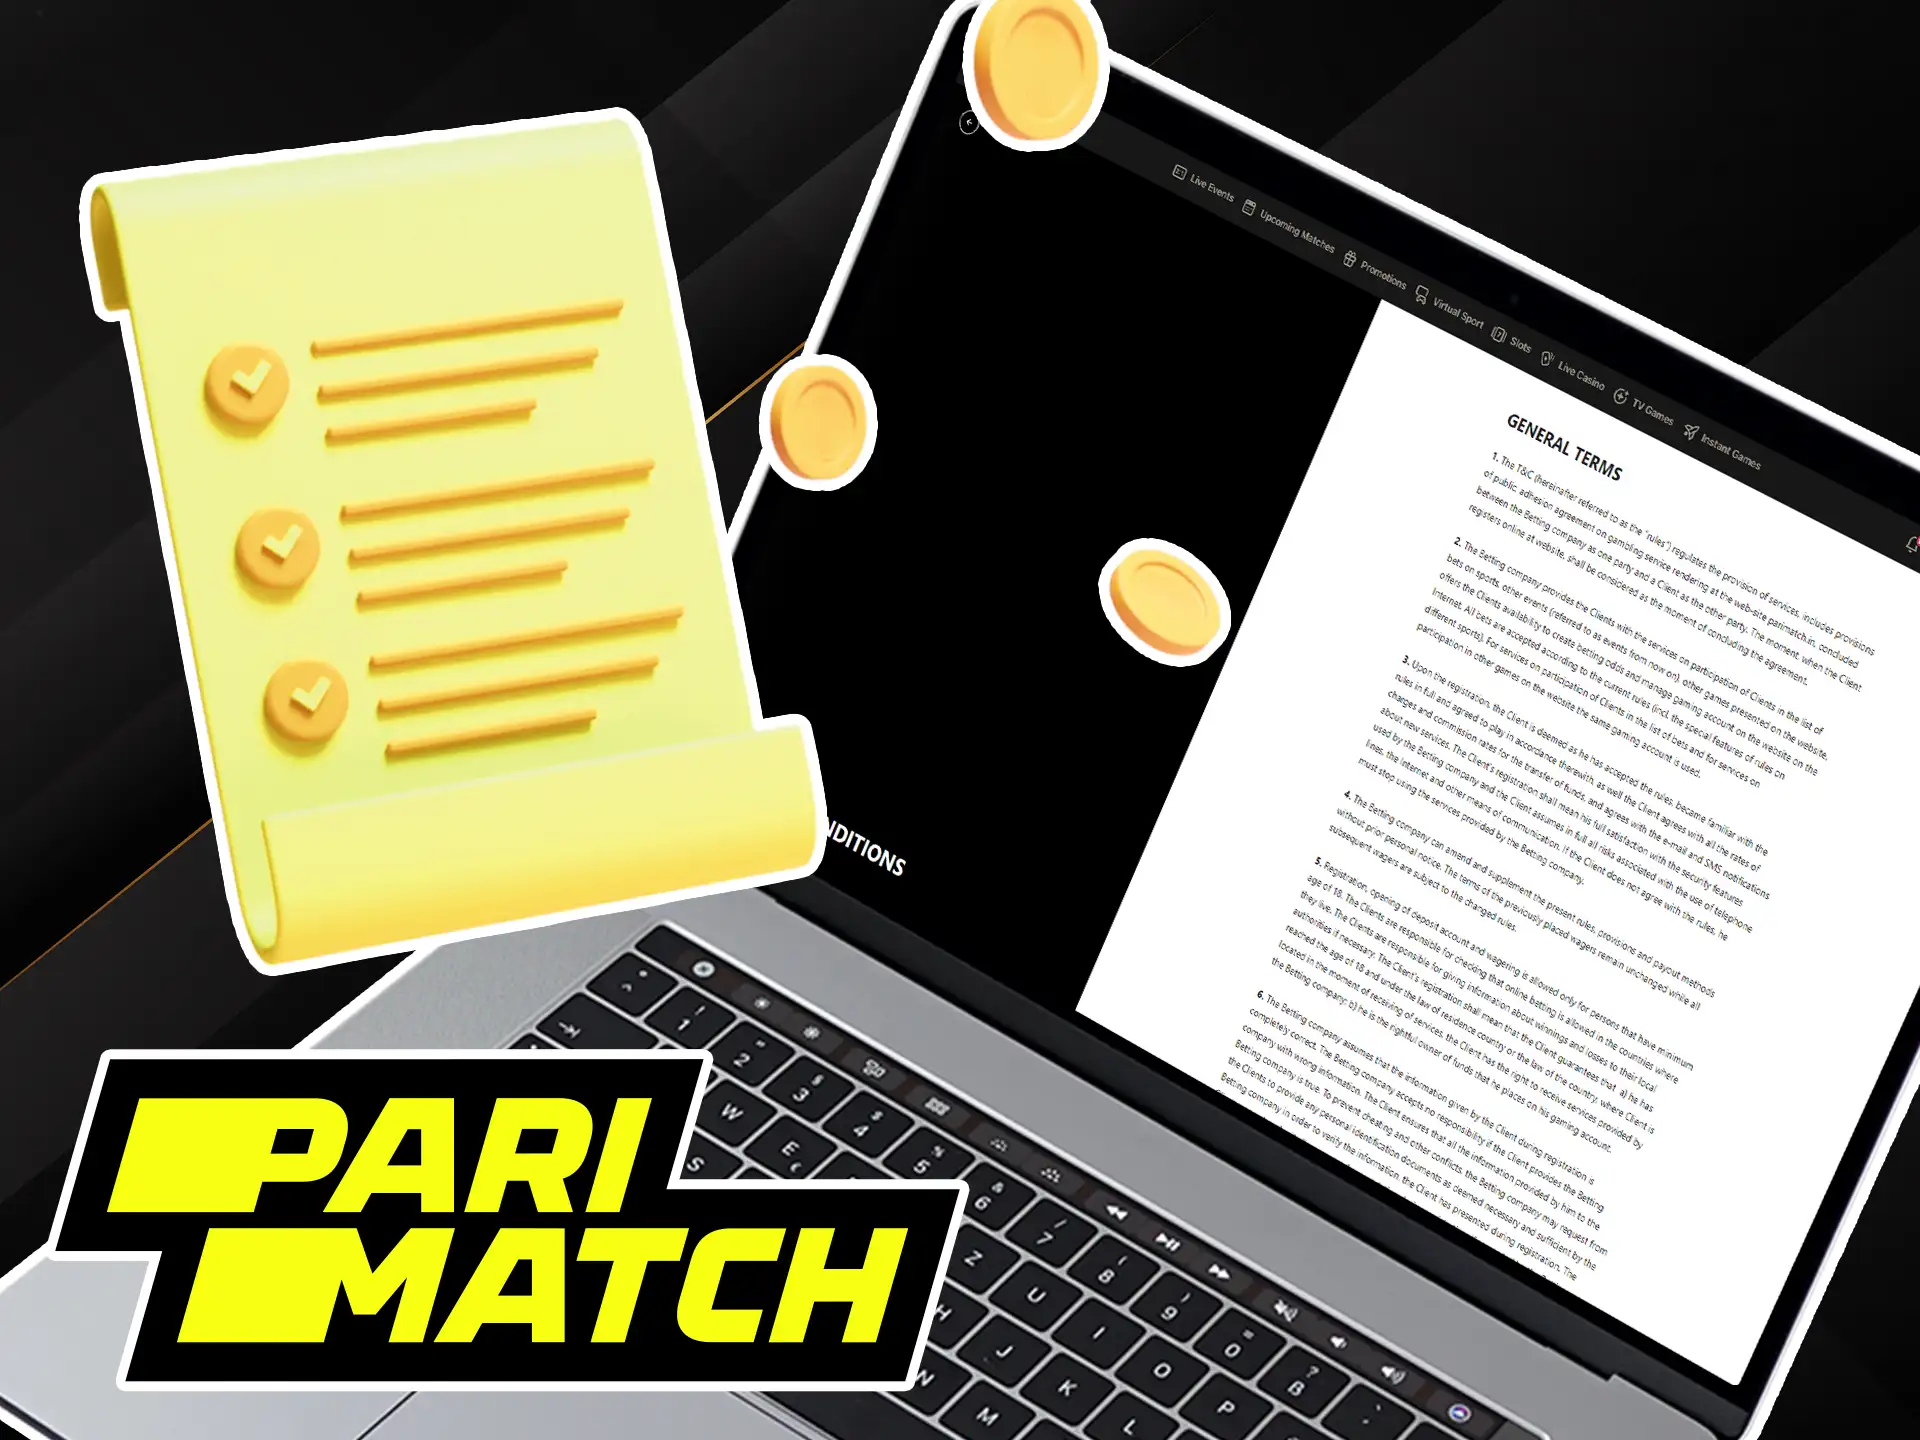 To claim the benefits of a Parimatch promo code, be sure to review the terms and conditions, including wagering requirements.